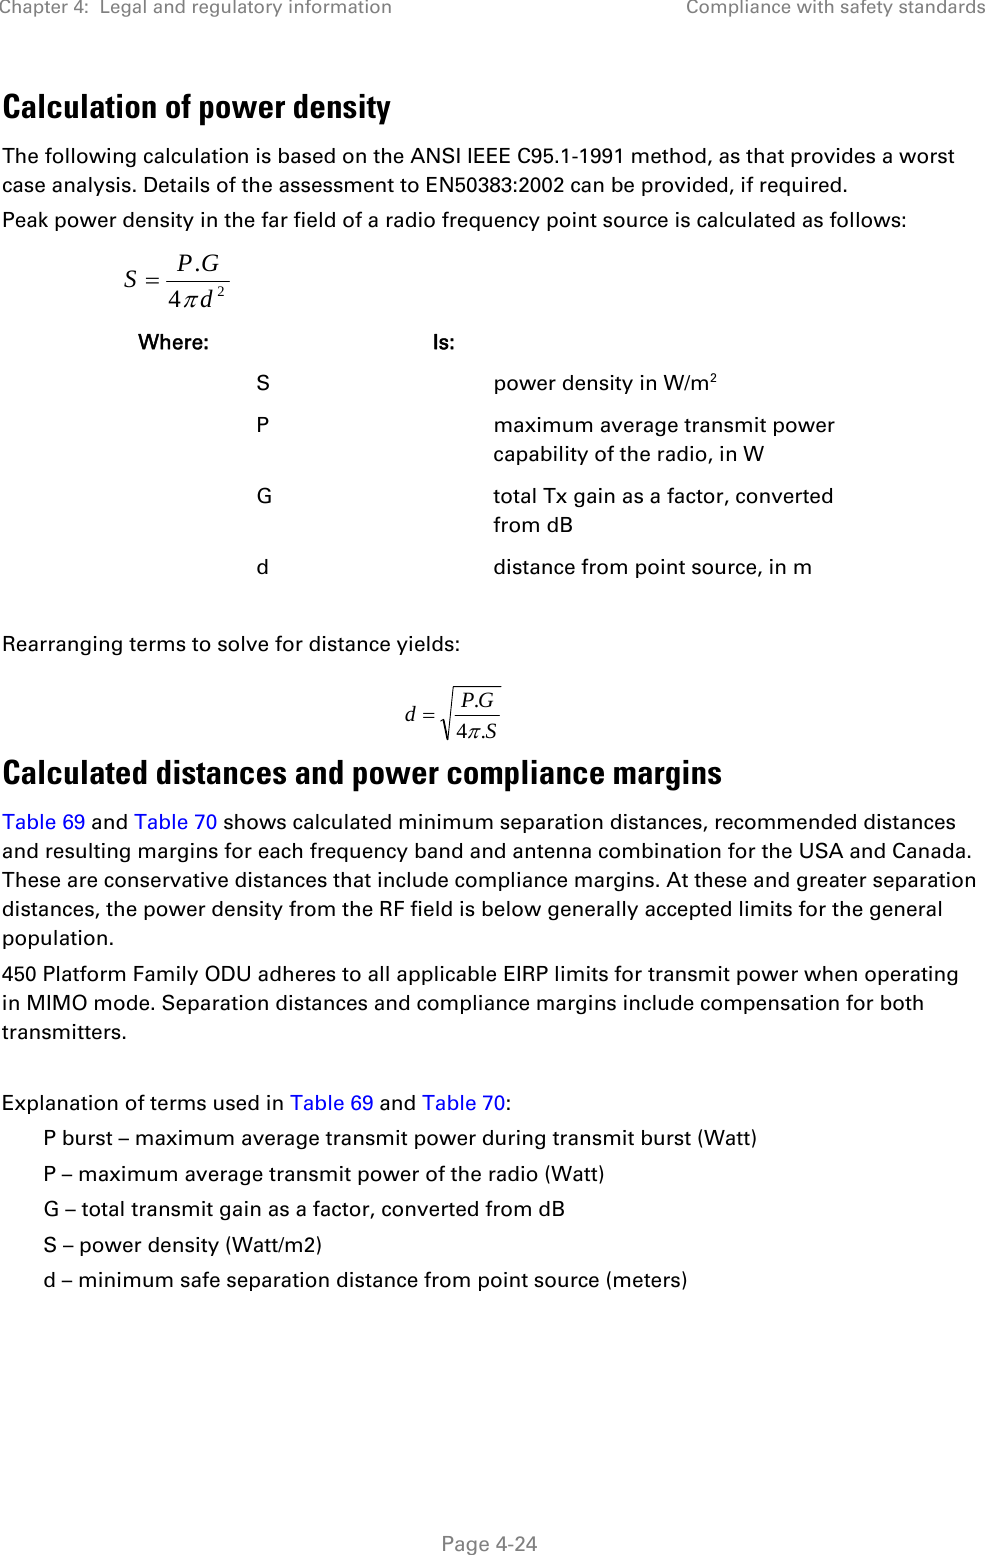 Chapter 4:  Legal and regulatory information  Compliance with safety standards   Page 4-24 Calculation of power density The following calculation is based on the ANSI IEEE C95.1-1991 method, as that provides a worst case analysis. Details of the assessment to EN50383:2002 can be provided, if required. Peak power density in the far field of a radio frequency point source is calculated as follows:   Where:   Is:     S    power density in W/m2   P    maximum average transmit power capability of the radio, in W   G    total Tx gain as a factor, converted from dB   d    distance from point source, in m  Rearranging terms to solve for distance yields:   Calculated distances and power compliance margins Table 69 and Table 70 shows calculated minimum separation distances, recommended distances and resulting margins for each frequency band and antenna combination for the USA and Canada. These are conservative distances that include compliance margins. At these and greater separation distances, the power density from the RF field is below generally accepted limits for the general population. 450 Platform Family ODU adheres to all applicable EIRP limits for transmit power when operating in MIMO mode. Separation distances and compliance margins include compensation for both transmitters.  Explanation of terms used in Table 69 and Table 70: P burst – maximum average transmit power during transmit burst (Watt) P – maximum average transmit power of the radio (Watt) G – total transmit gain as a factor, converted from dB S – power density (Watt/m2) d – minimum safe separation distance from point source (meters)  24.dGPSSGPd.4.